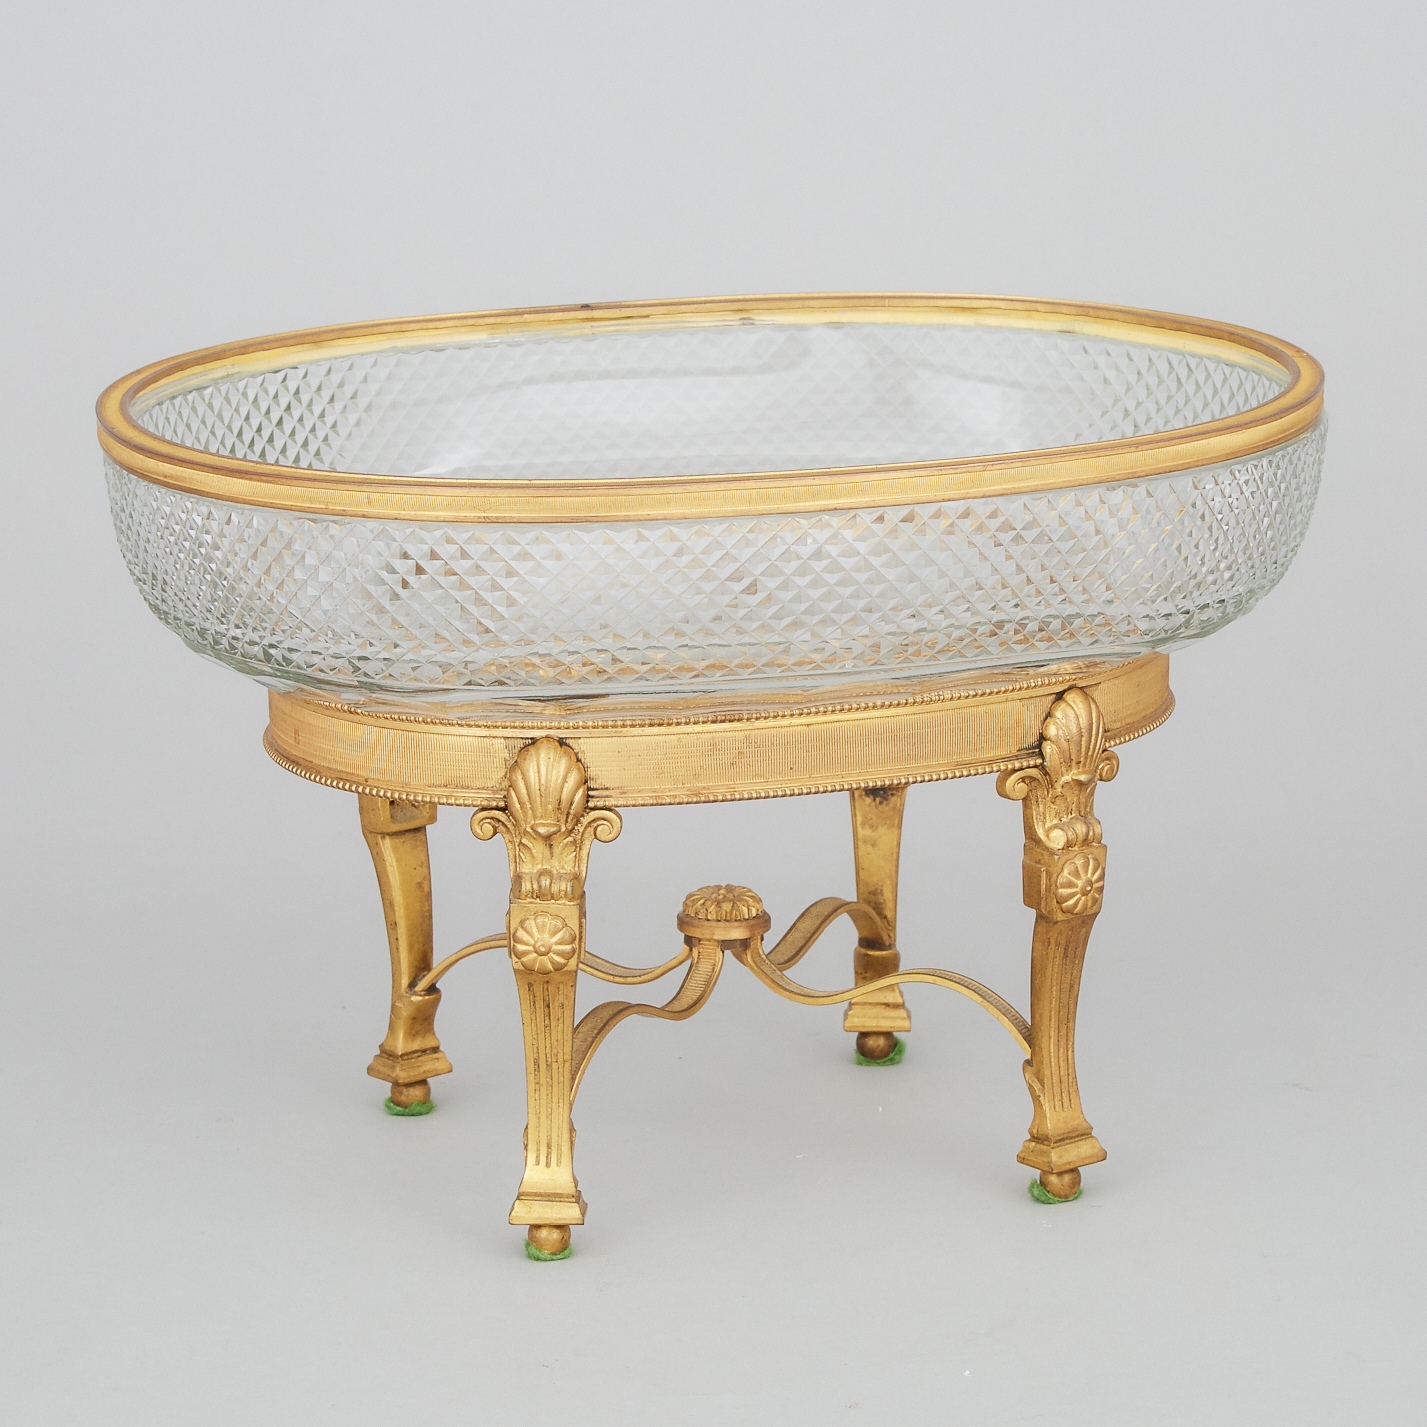 Austrian Neo Classical Ormolu Mounted Cut Glass Centrepiece Bowl on Stand, mid 20th century